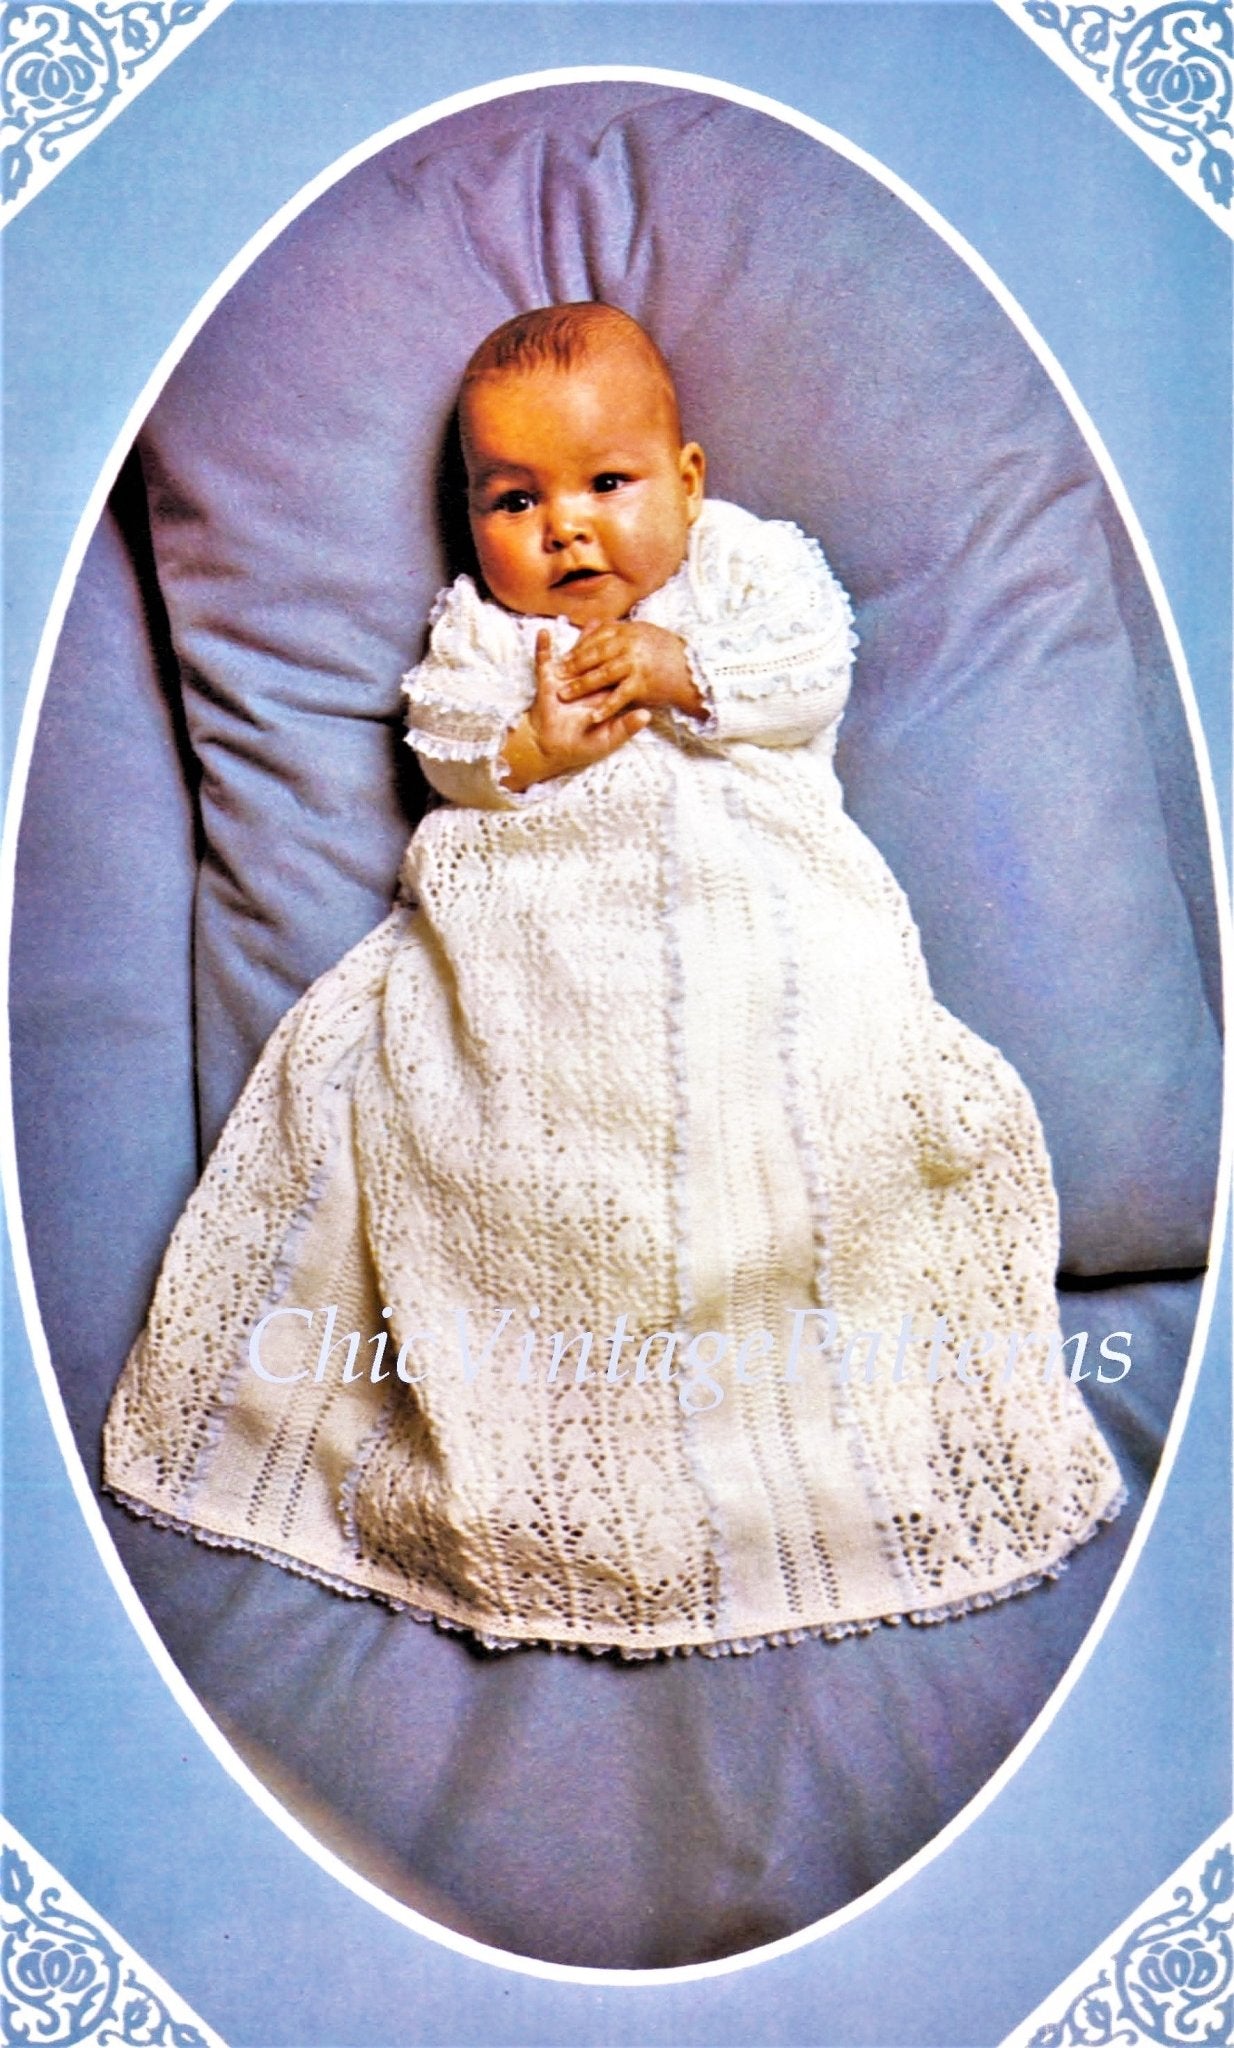 Buy CROCHET PATTERN Christening Gown Outfit Baby Dress Blanket and Booties  Pdf by Delsie Rhoades Download Through Etsy Online in India - Etsy